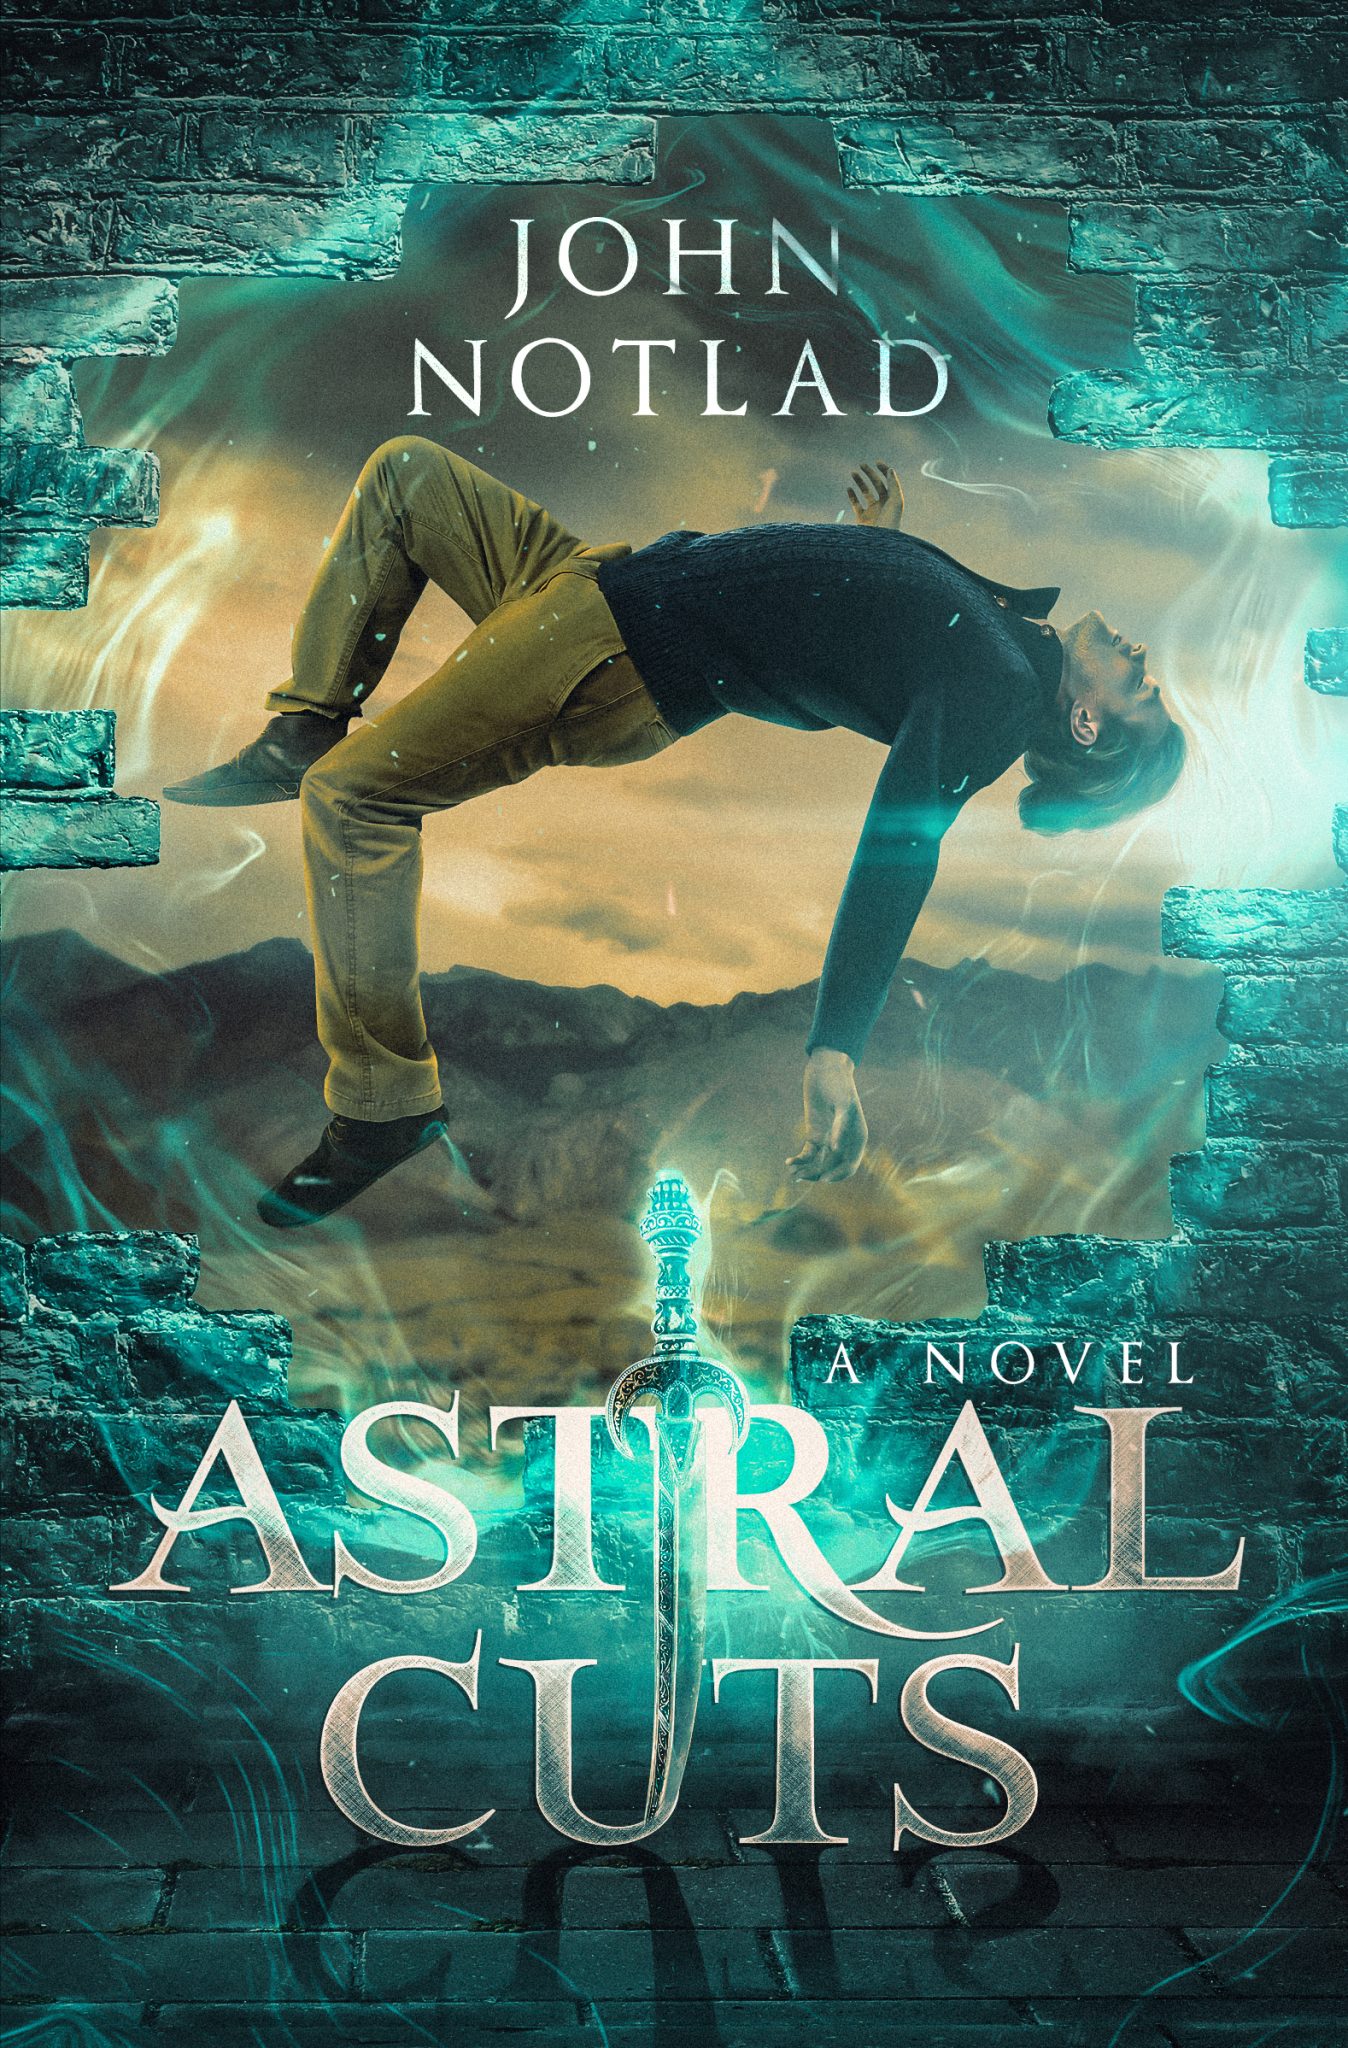 Astral Cuts by John Notlad